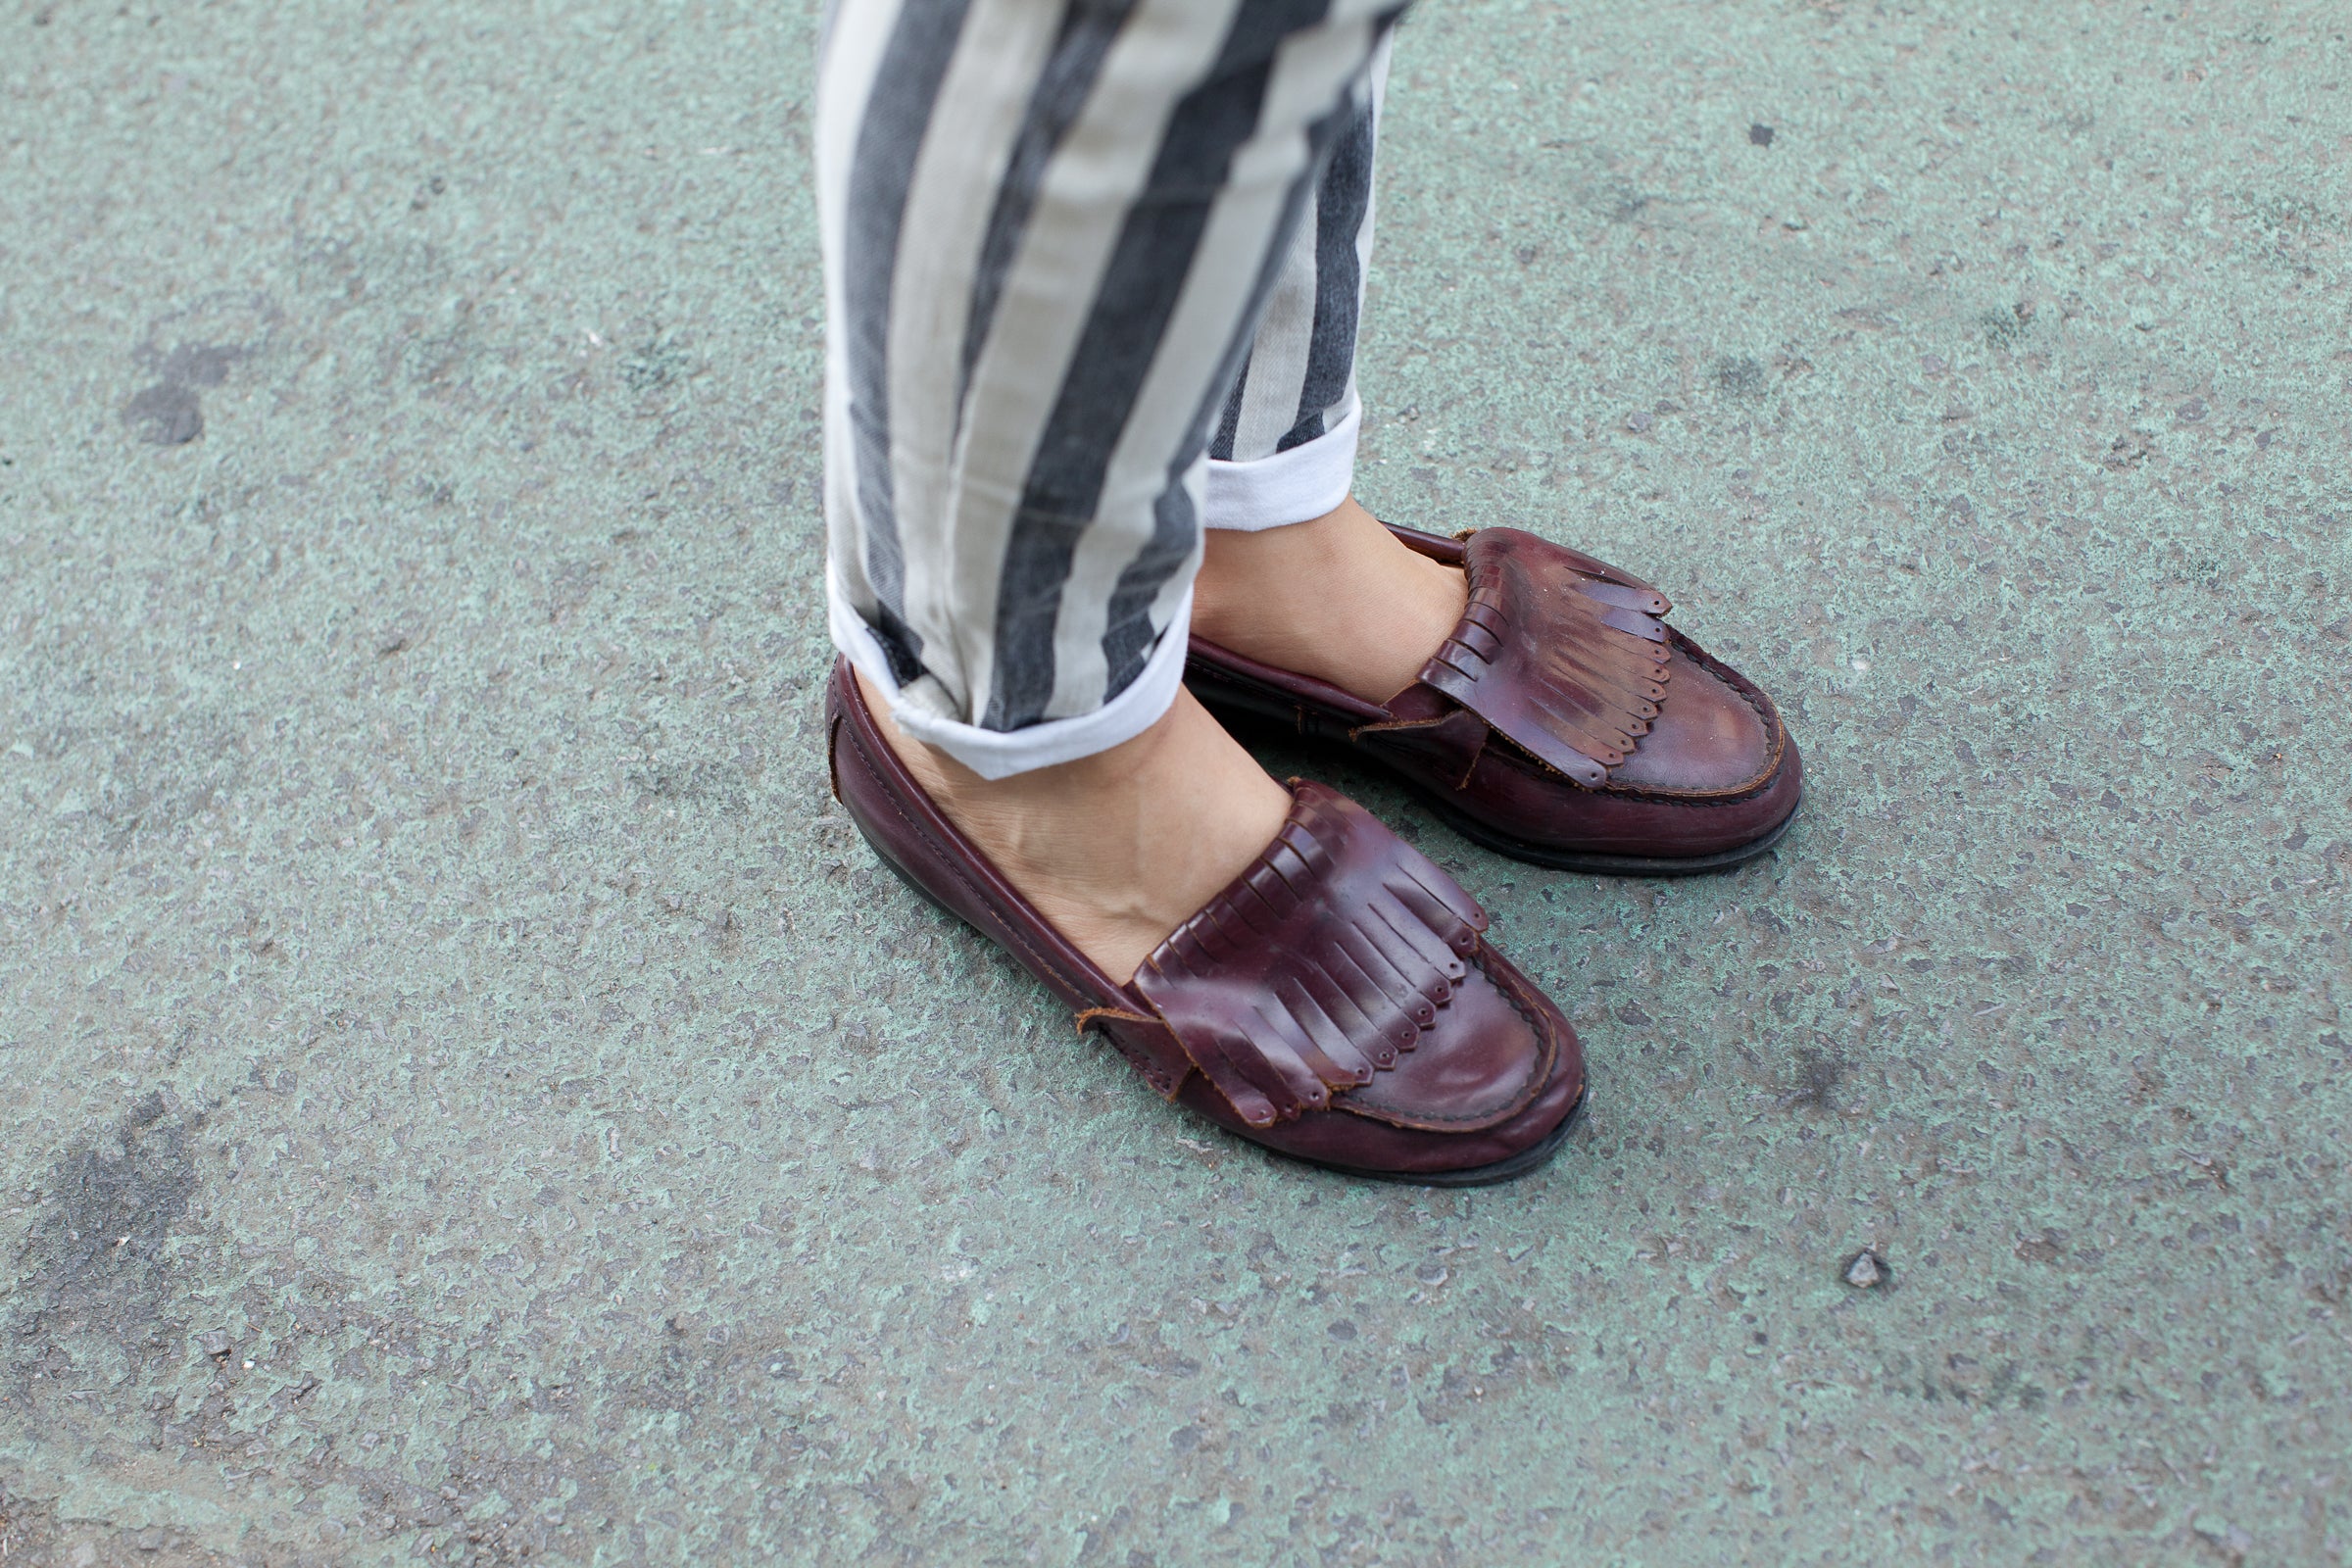 Ladies in Loafers